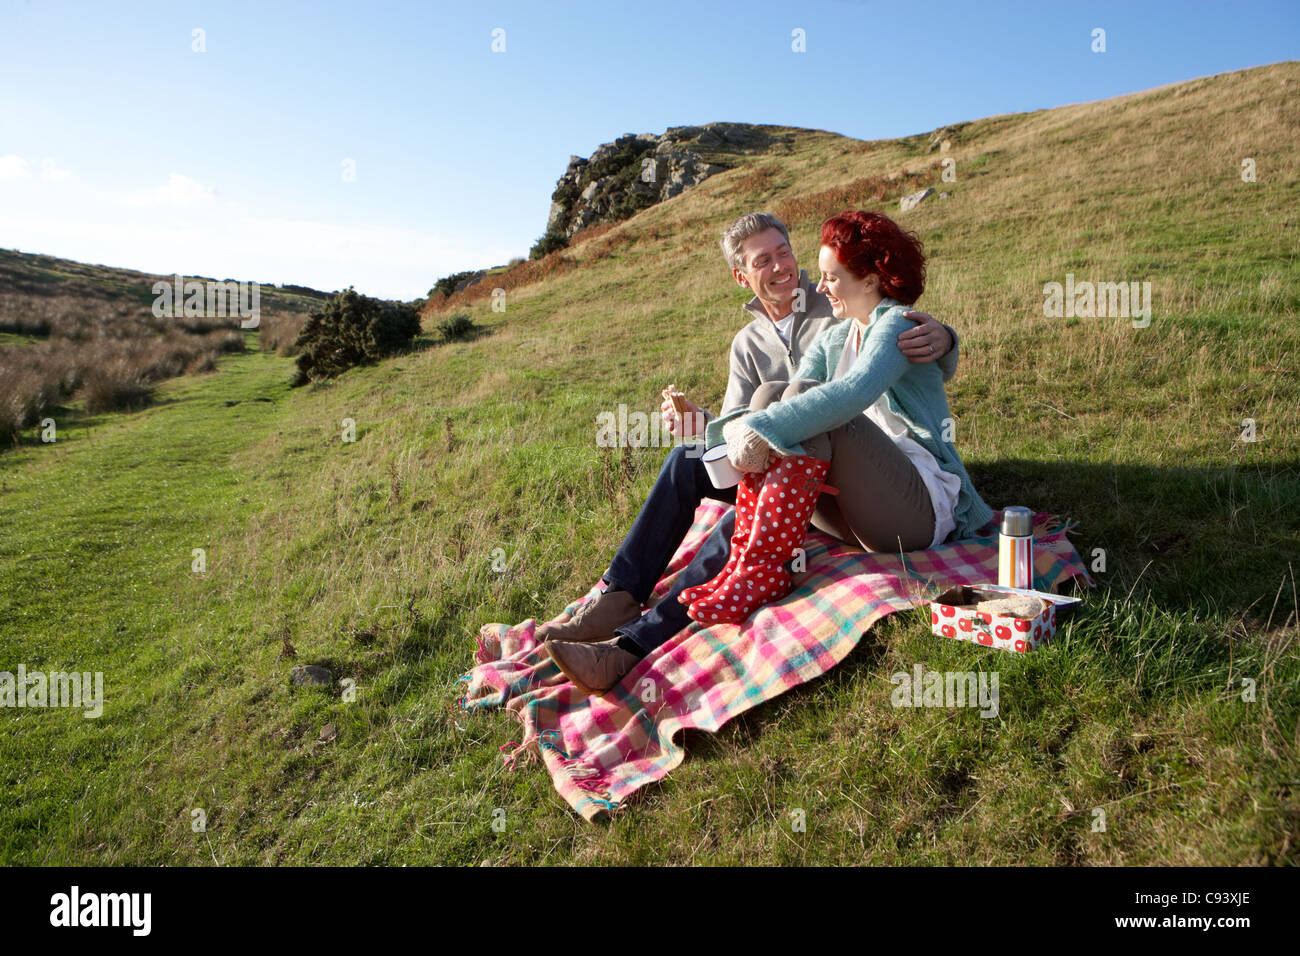 Couple on country picnic Stock Photo